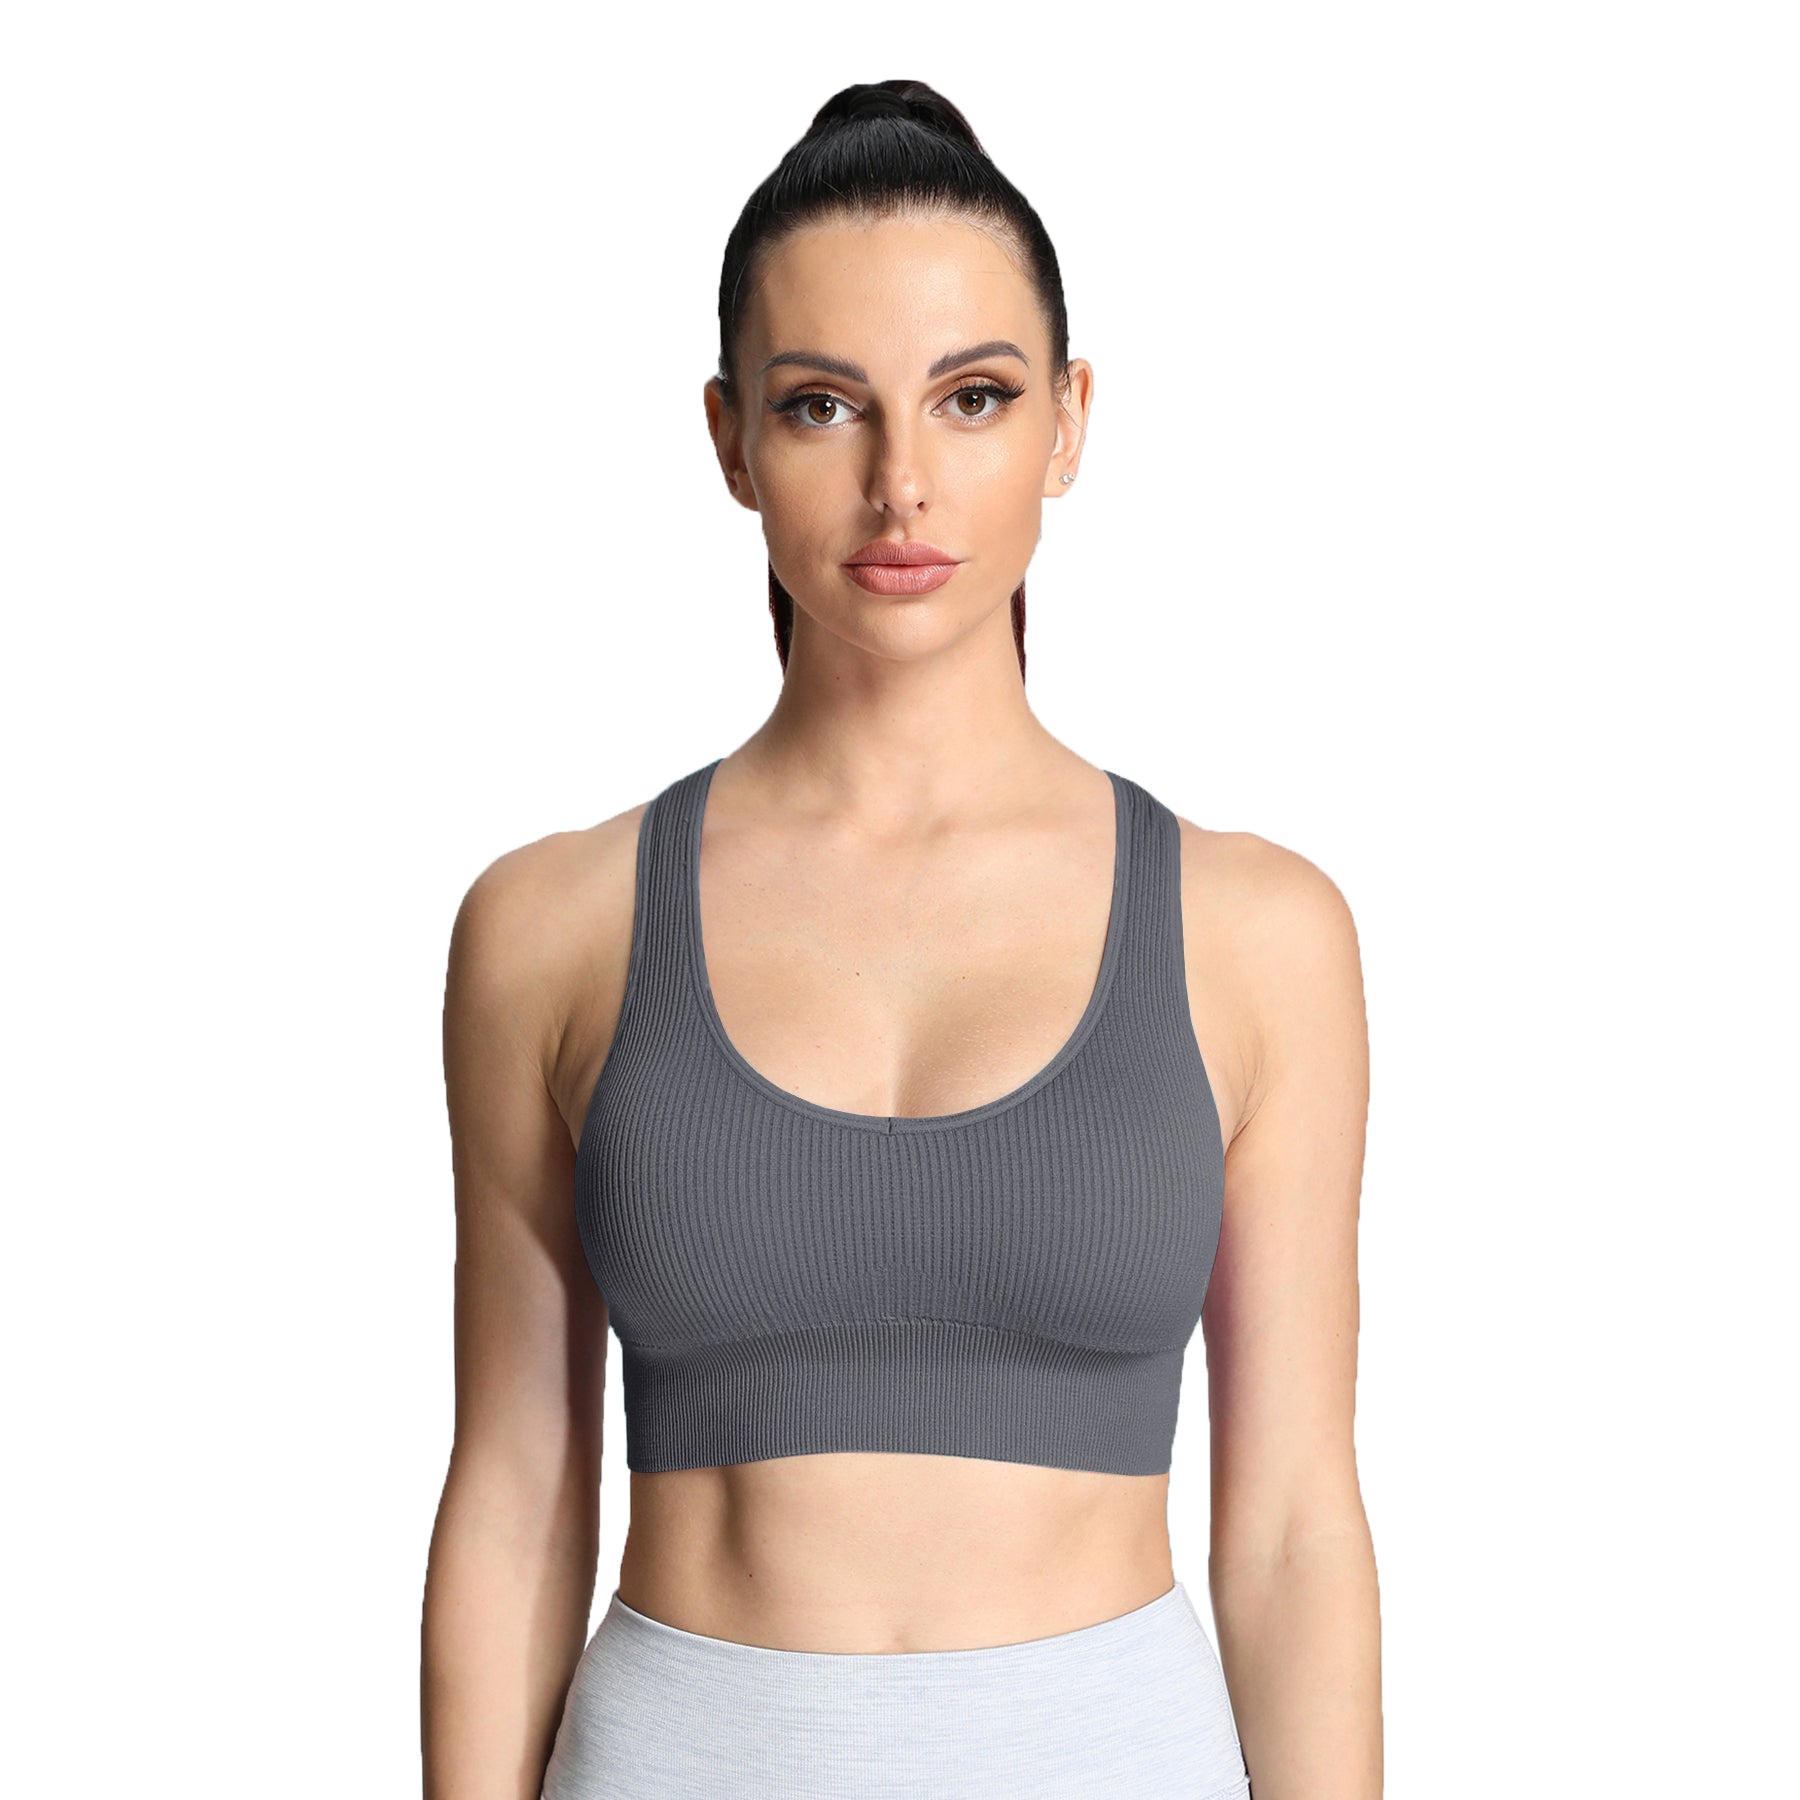 Aoxjox Front Cut-out Journey Seamless Bra